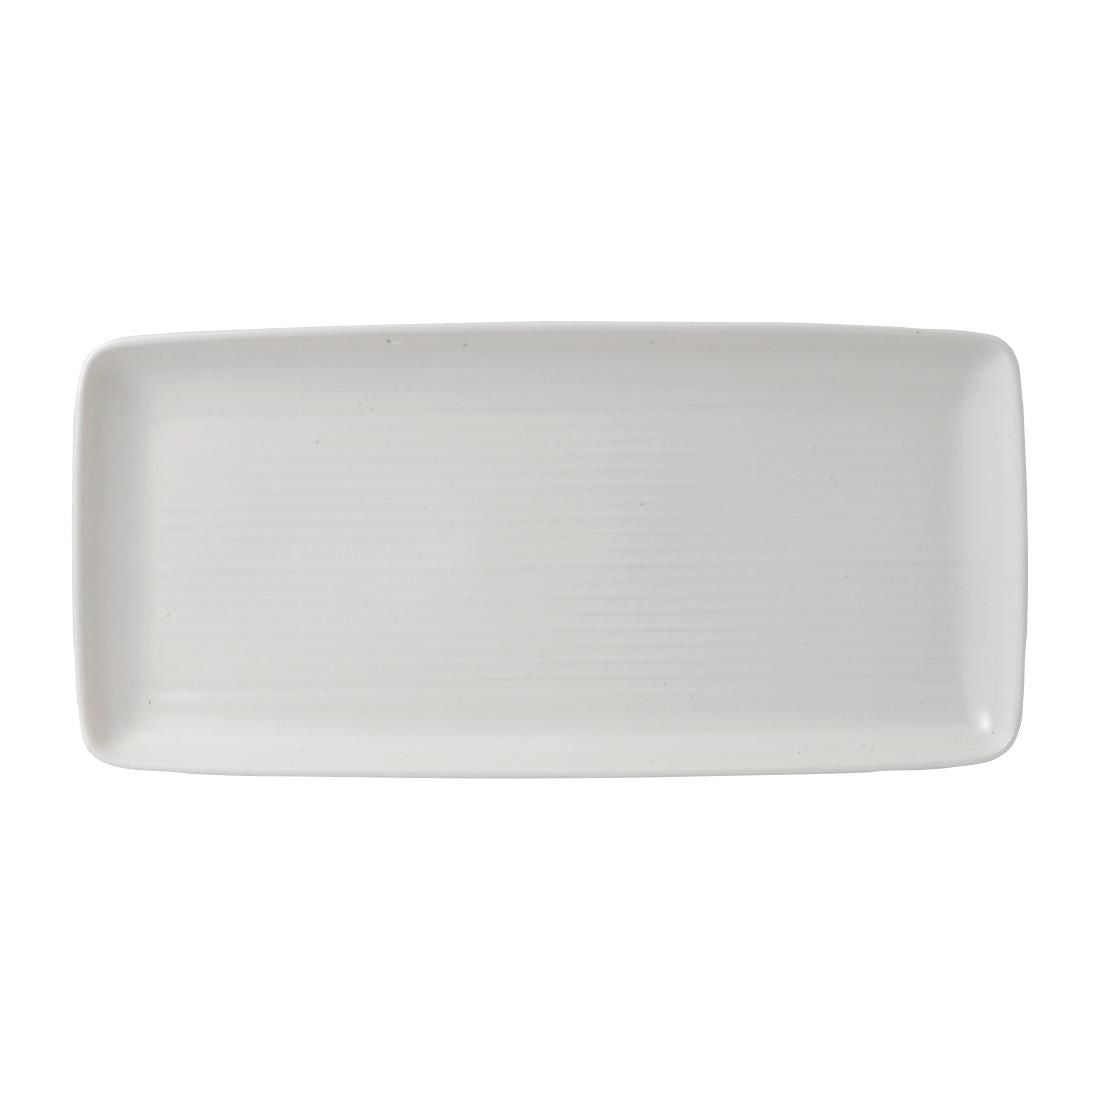 FE343 Dudson Evo Pearl Rectangular Tray 270 x 124mm (Pack of 6) JD Catering Equipment Solutions Ltd